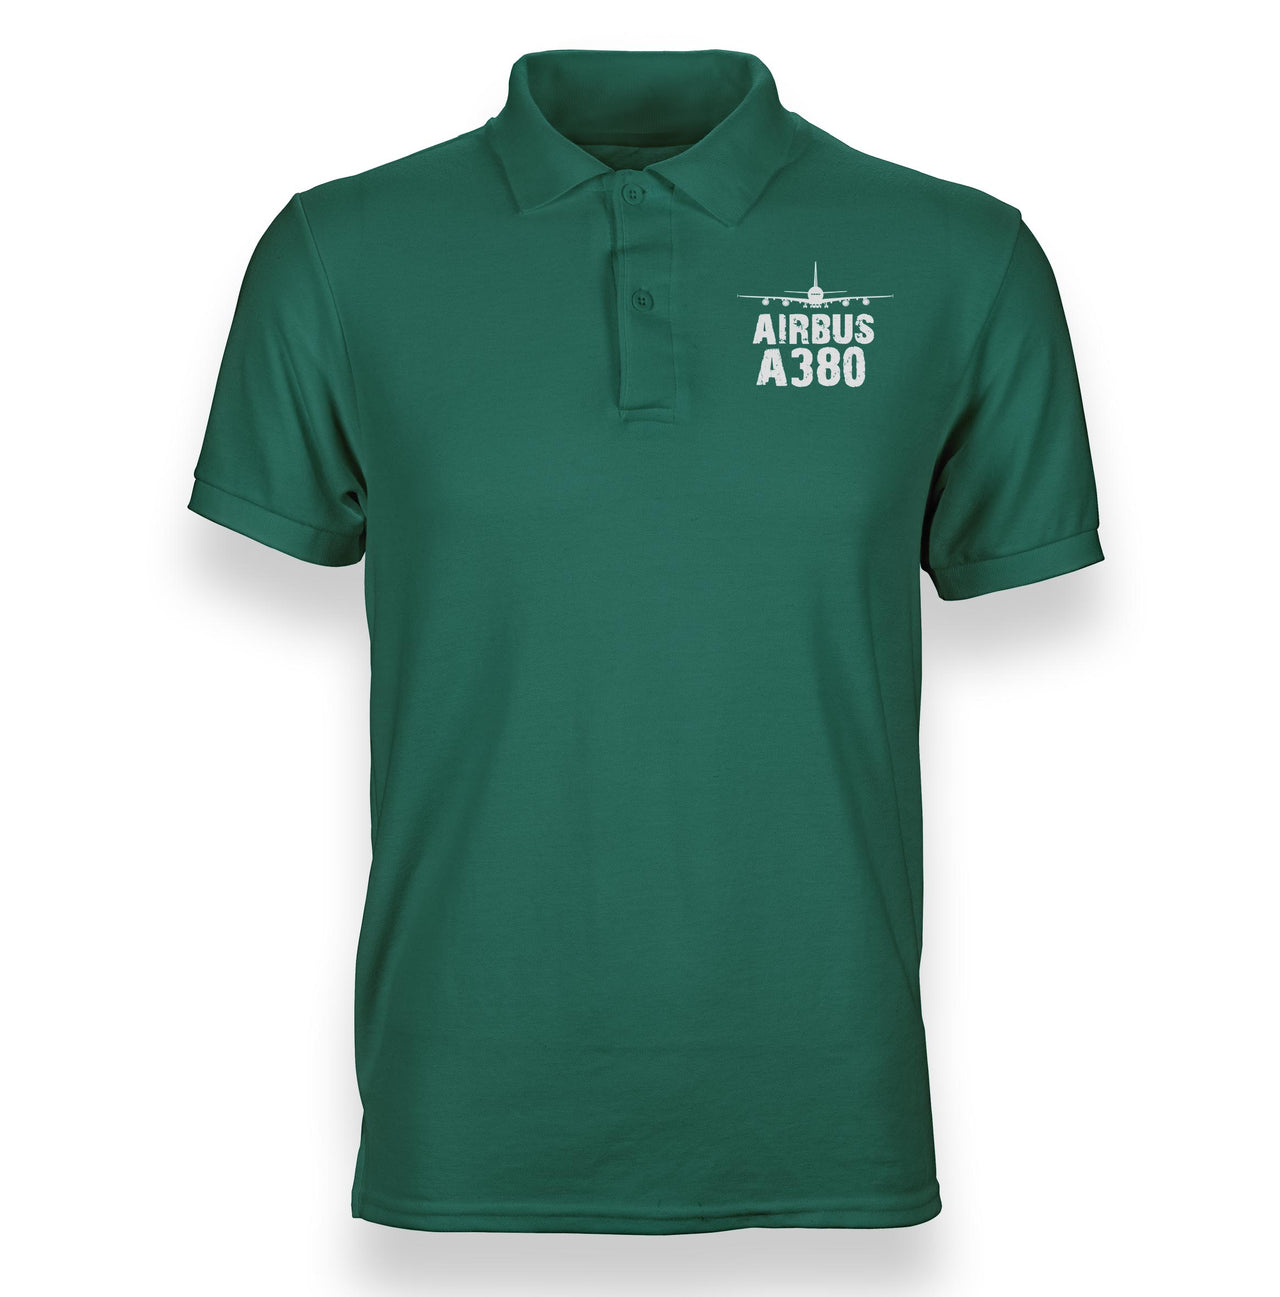 Airbus A380 & Plane Designed Polo T-Shirts